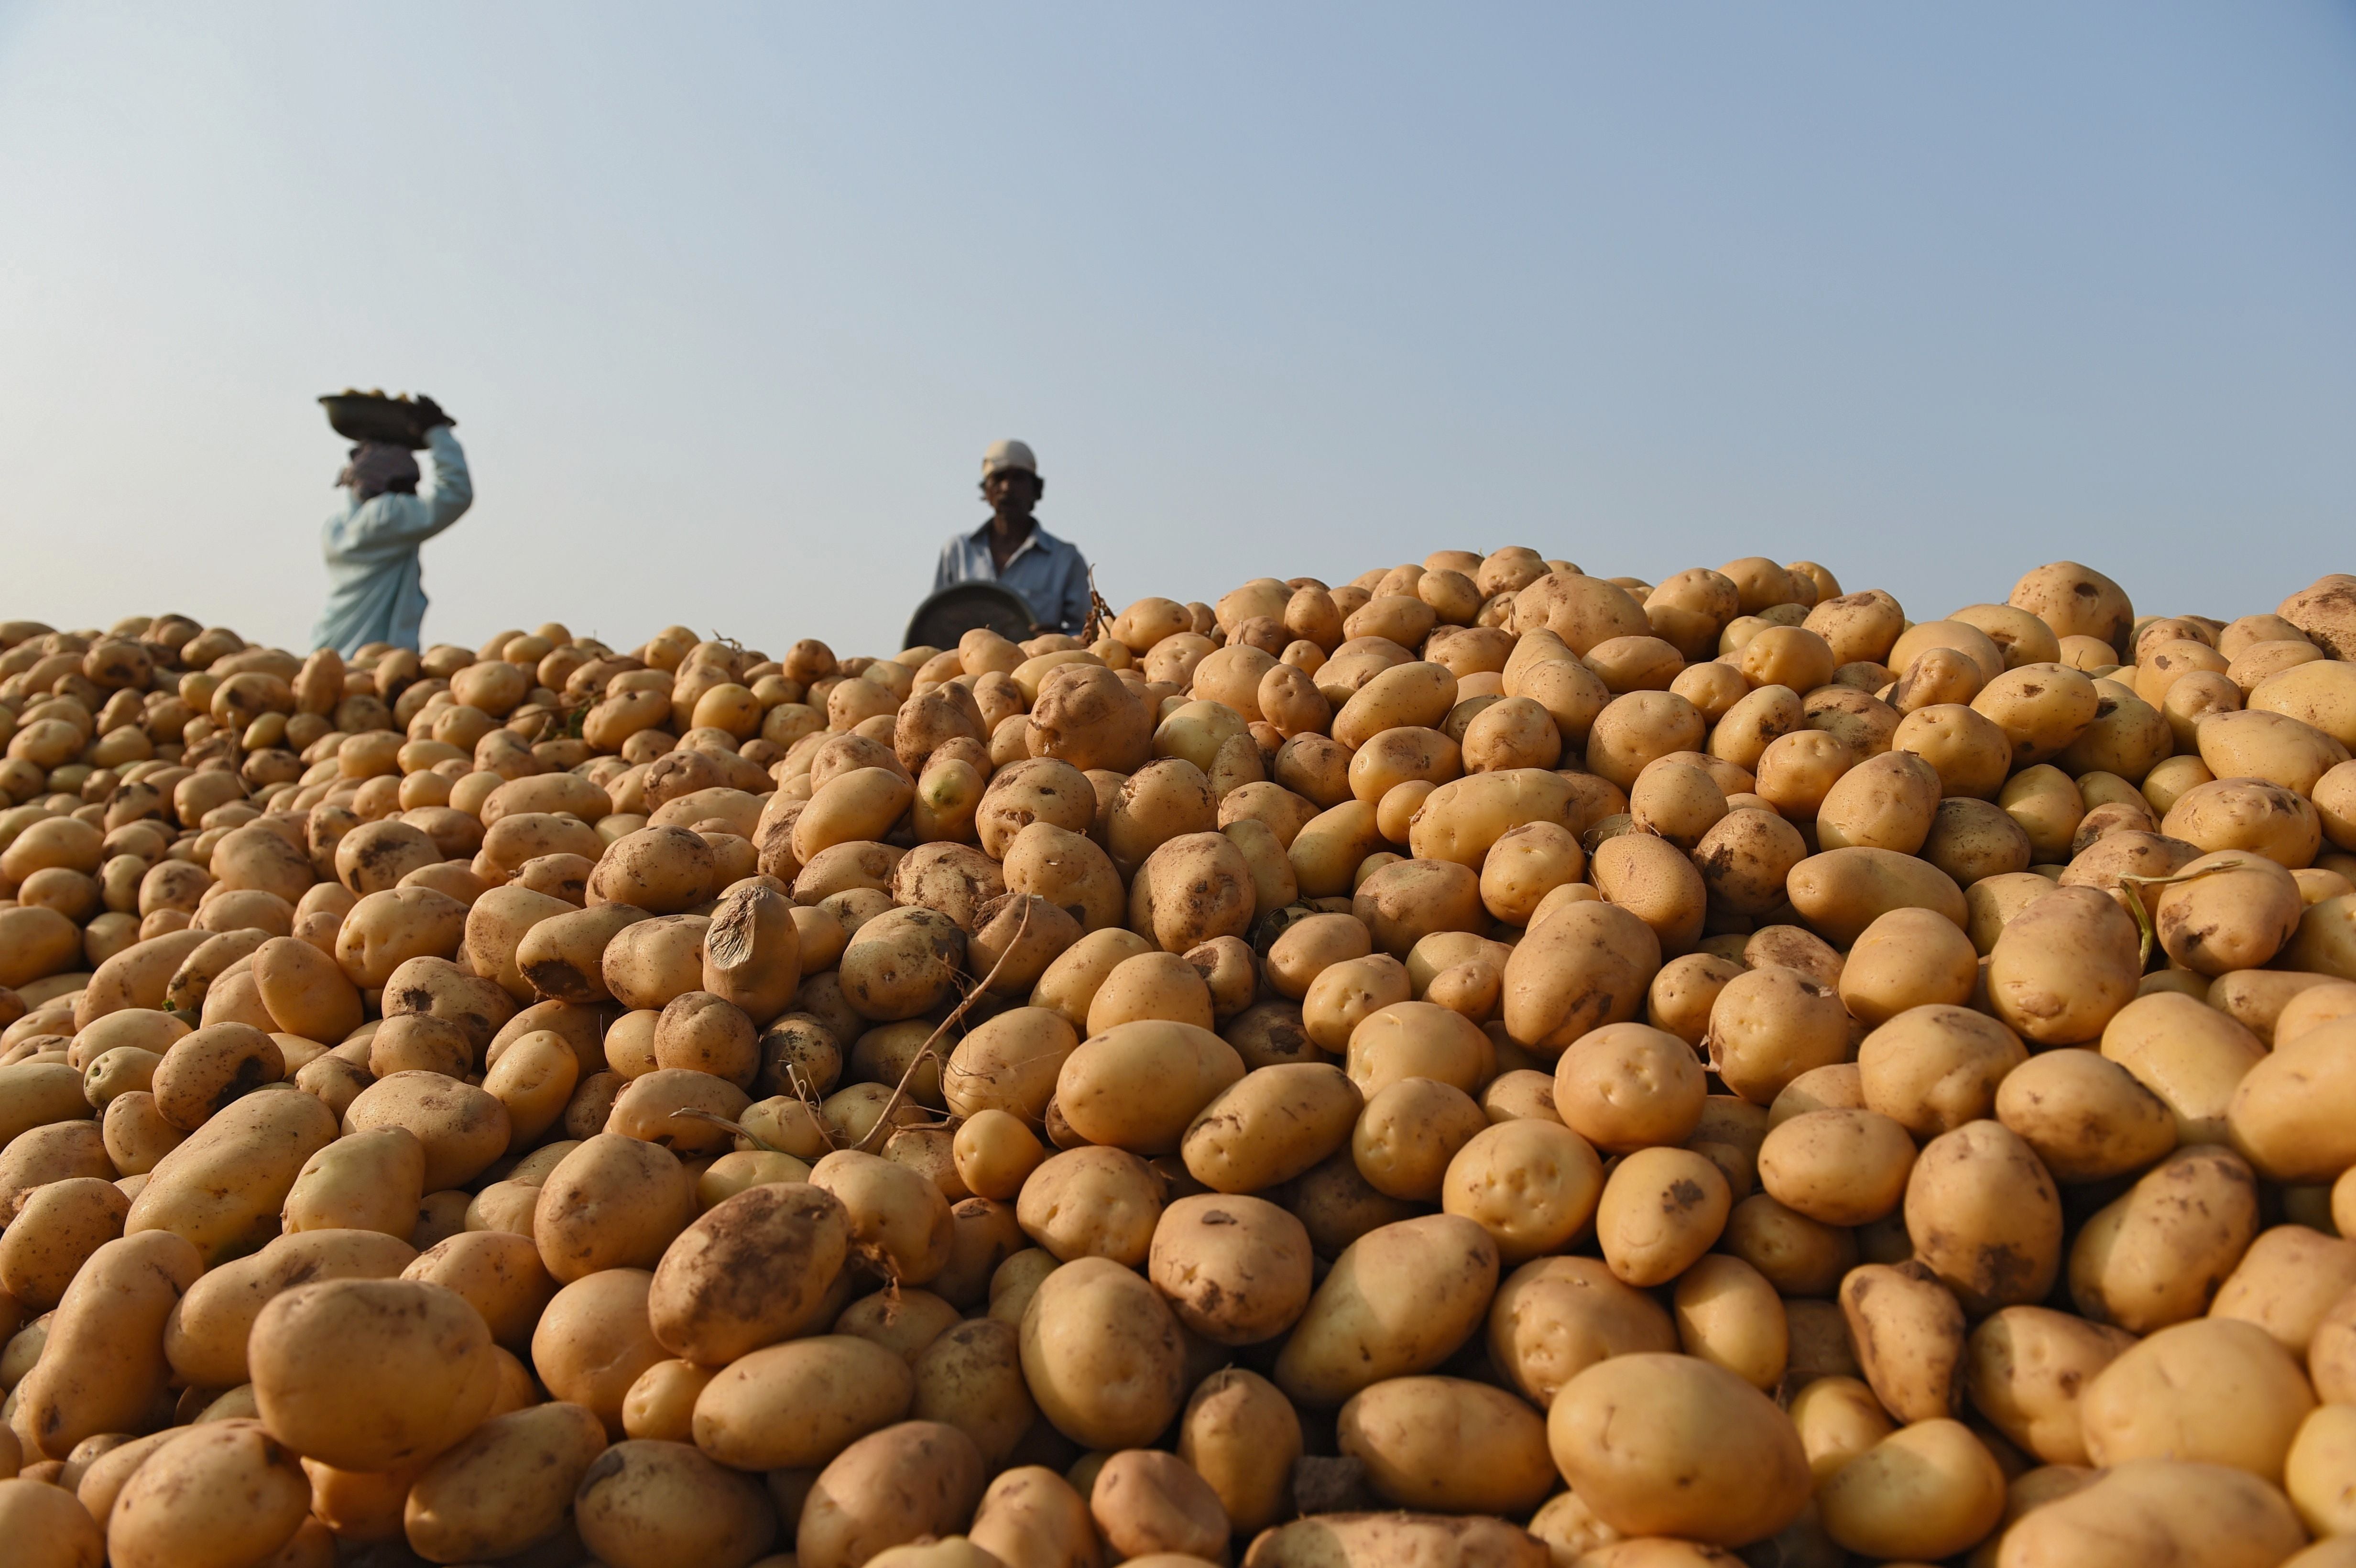 File: Indian farmers pile harvested potatoes in a field